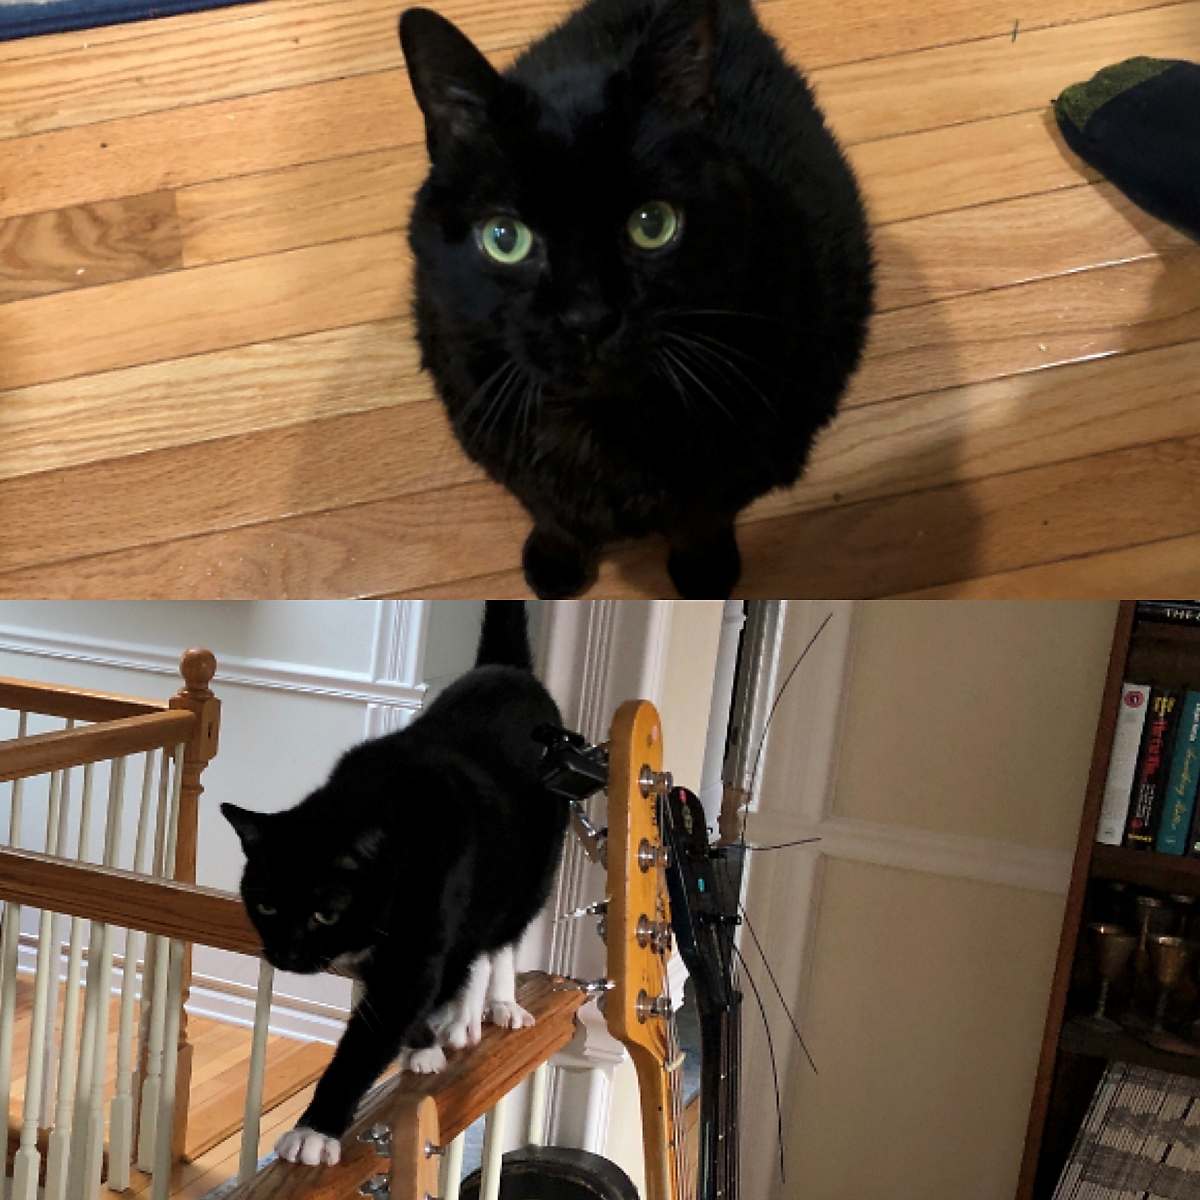 A black cat sitting on the floor looking up and a black cat crawling along a banister